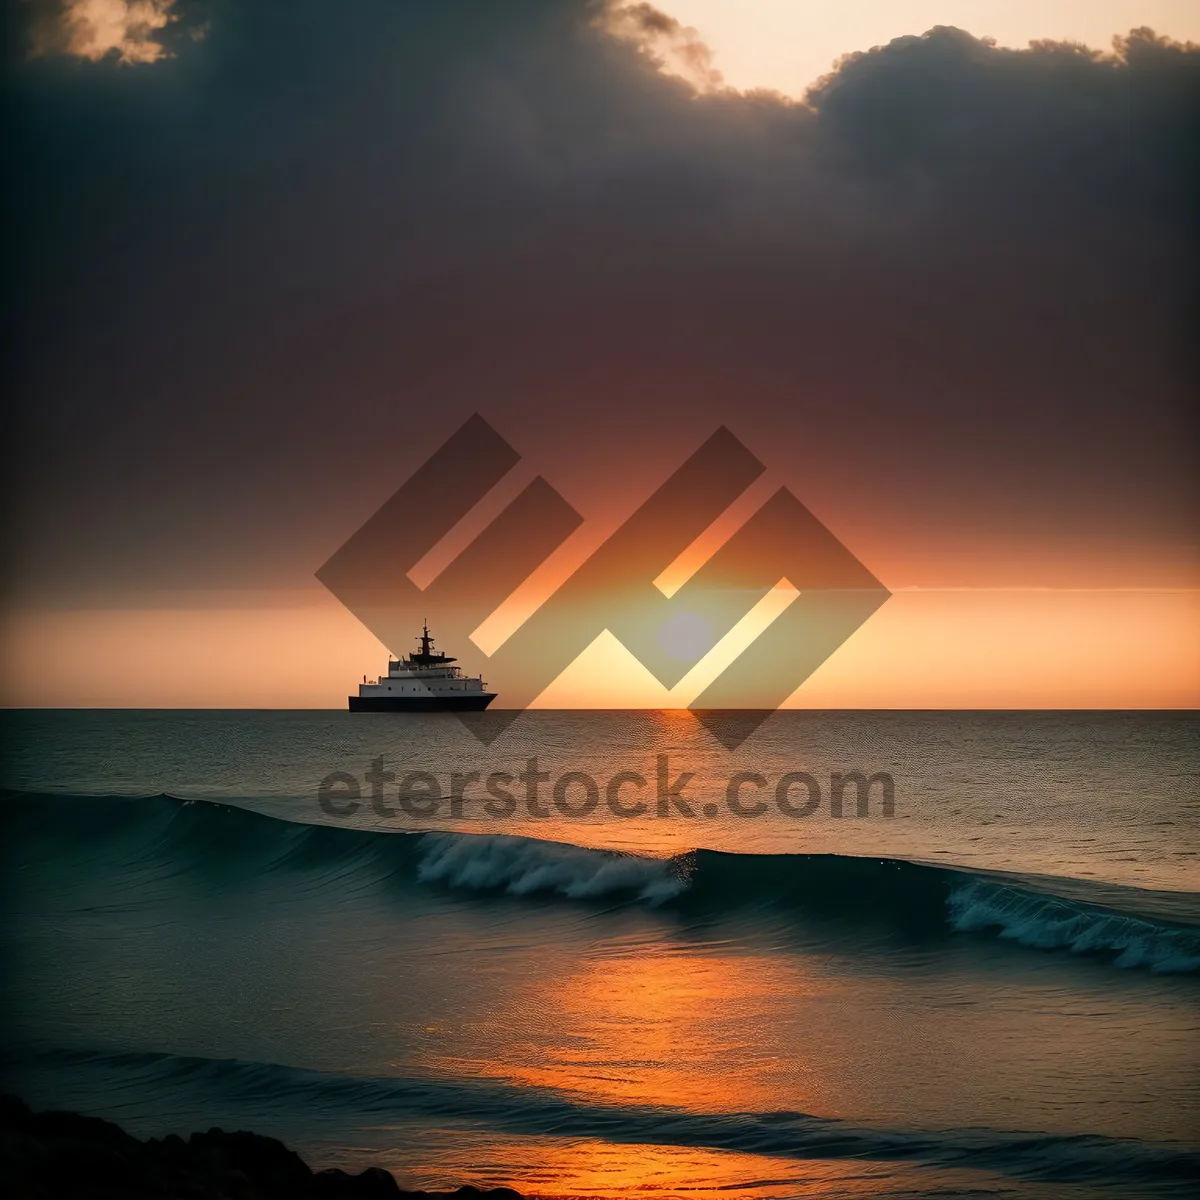 Picture of Coastal City Sunset over Ocean